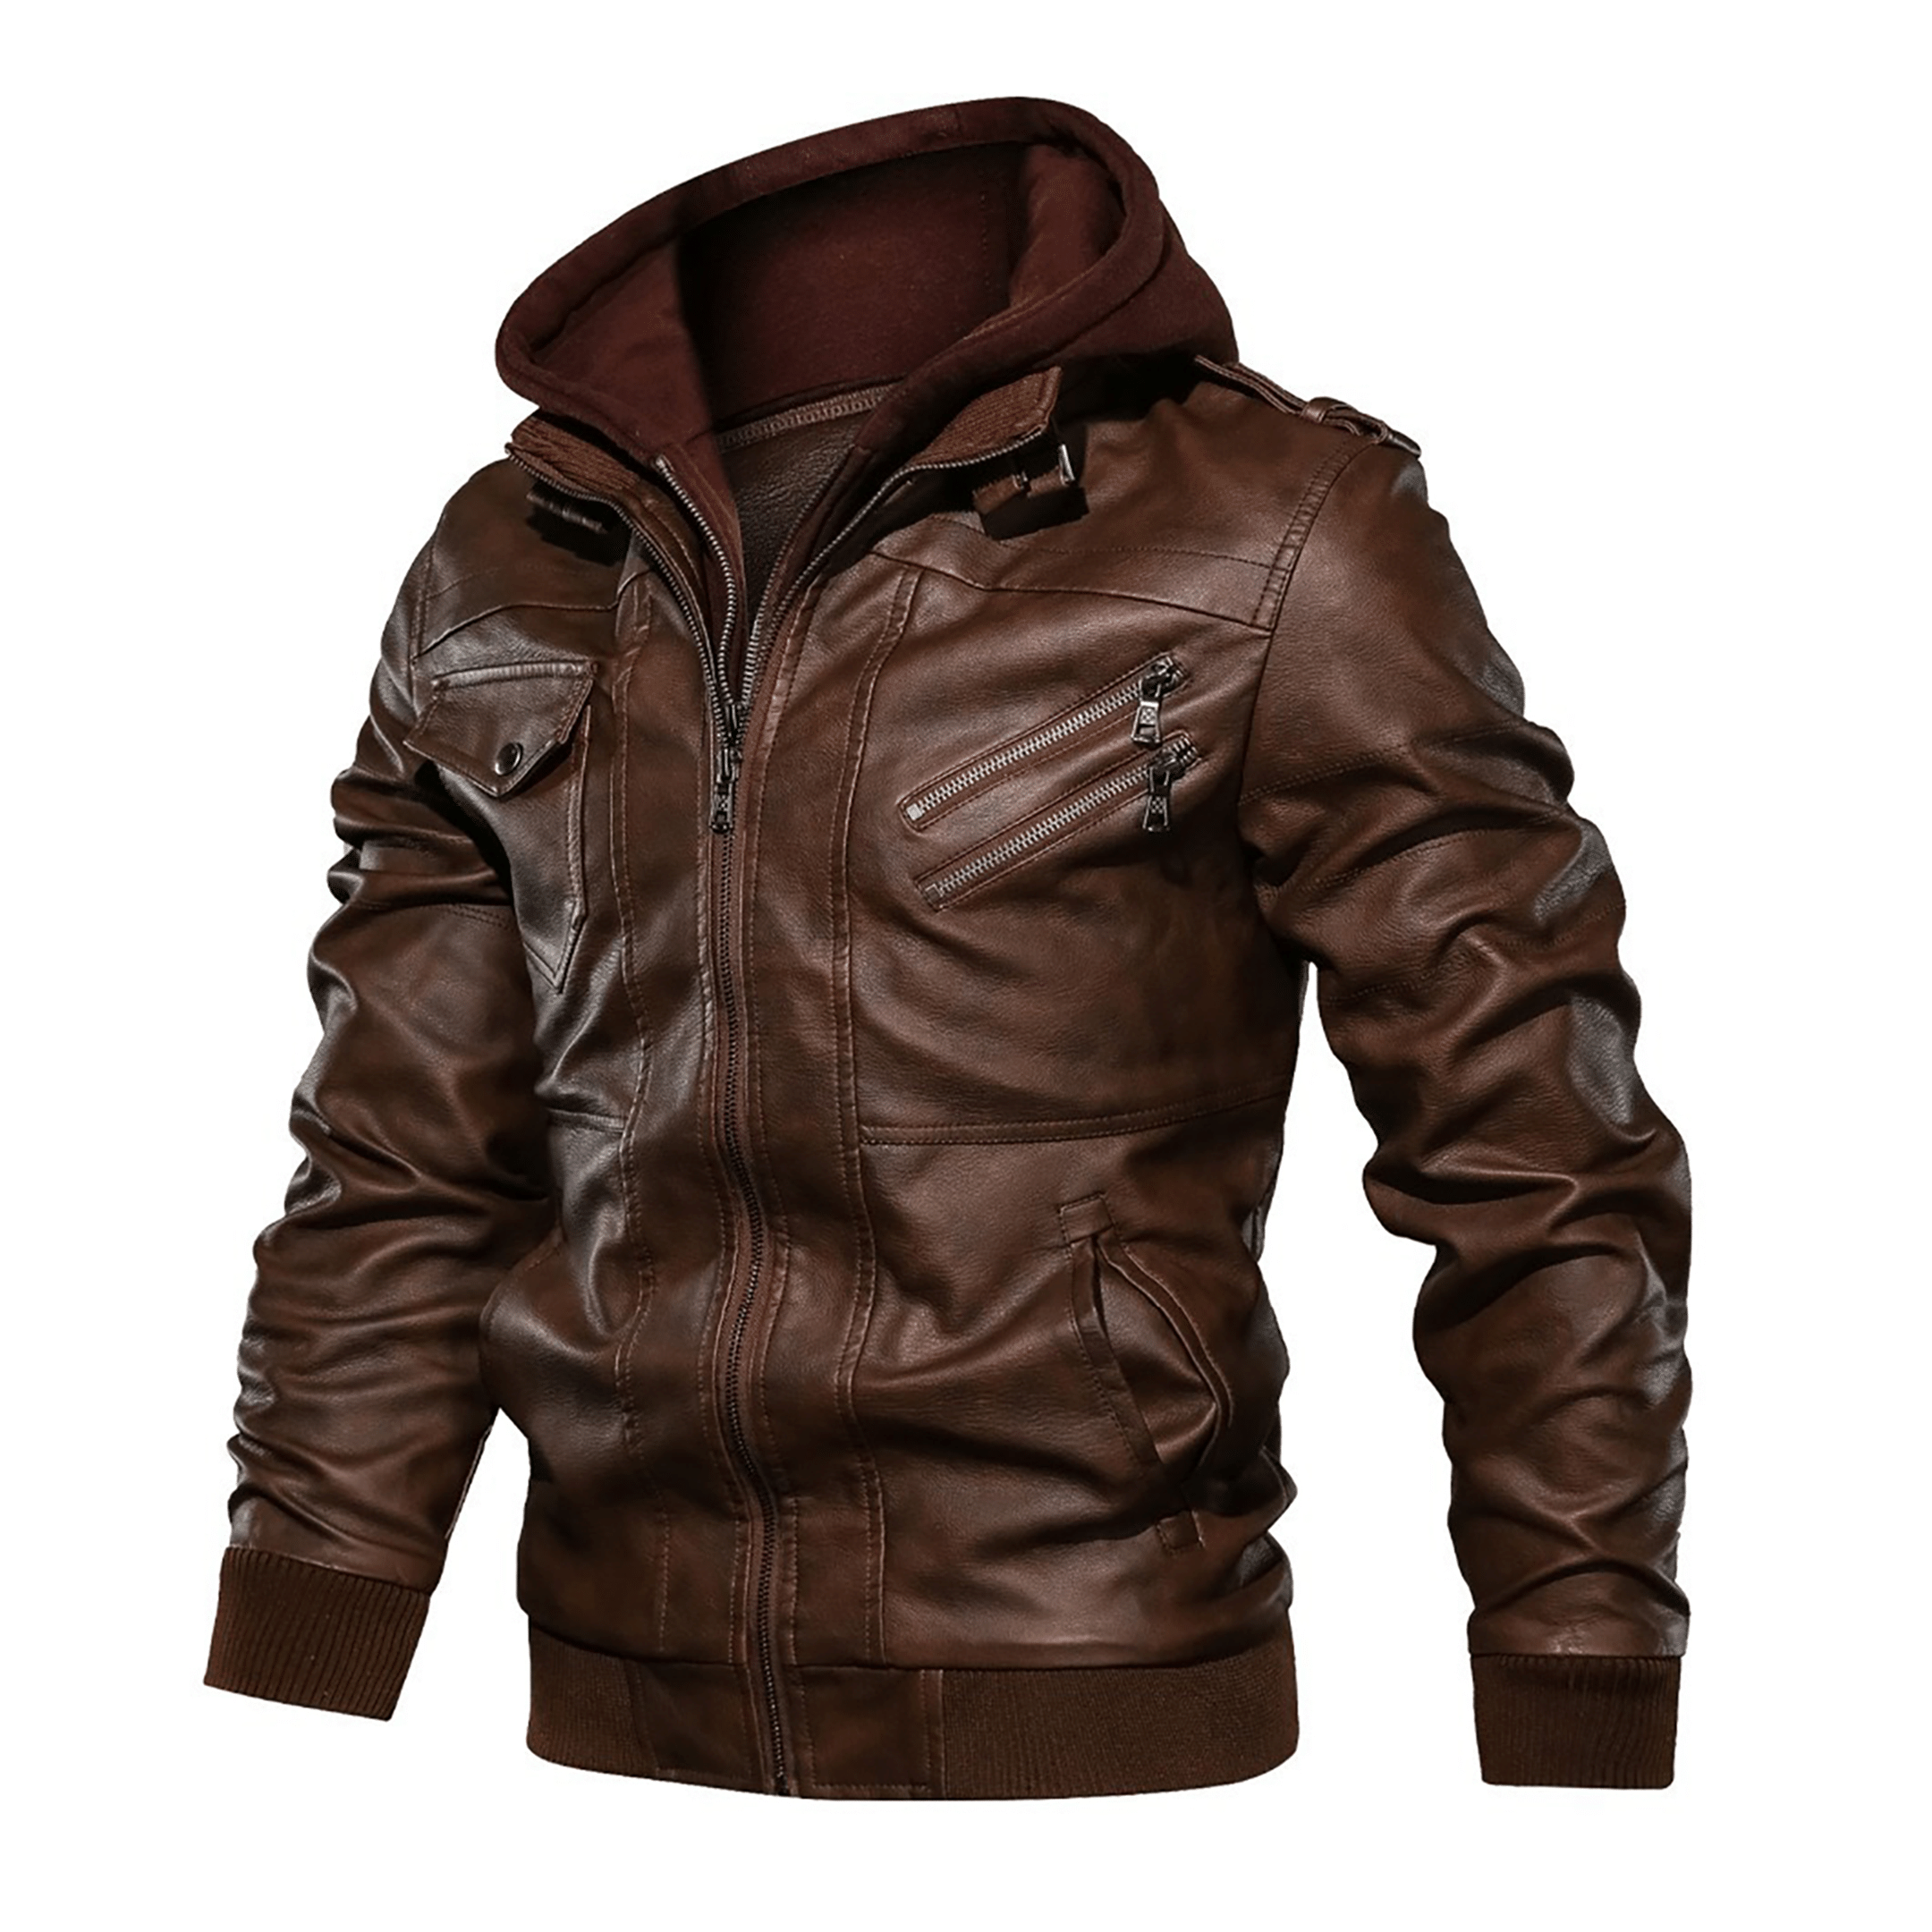 Top leather jackets and latest products 213